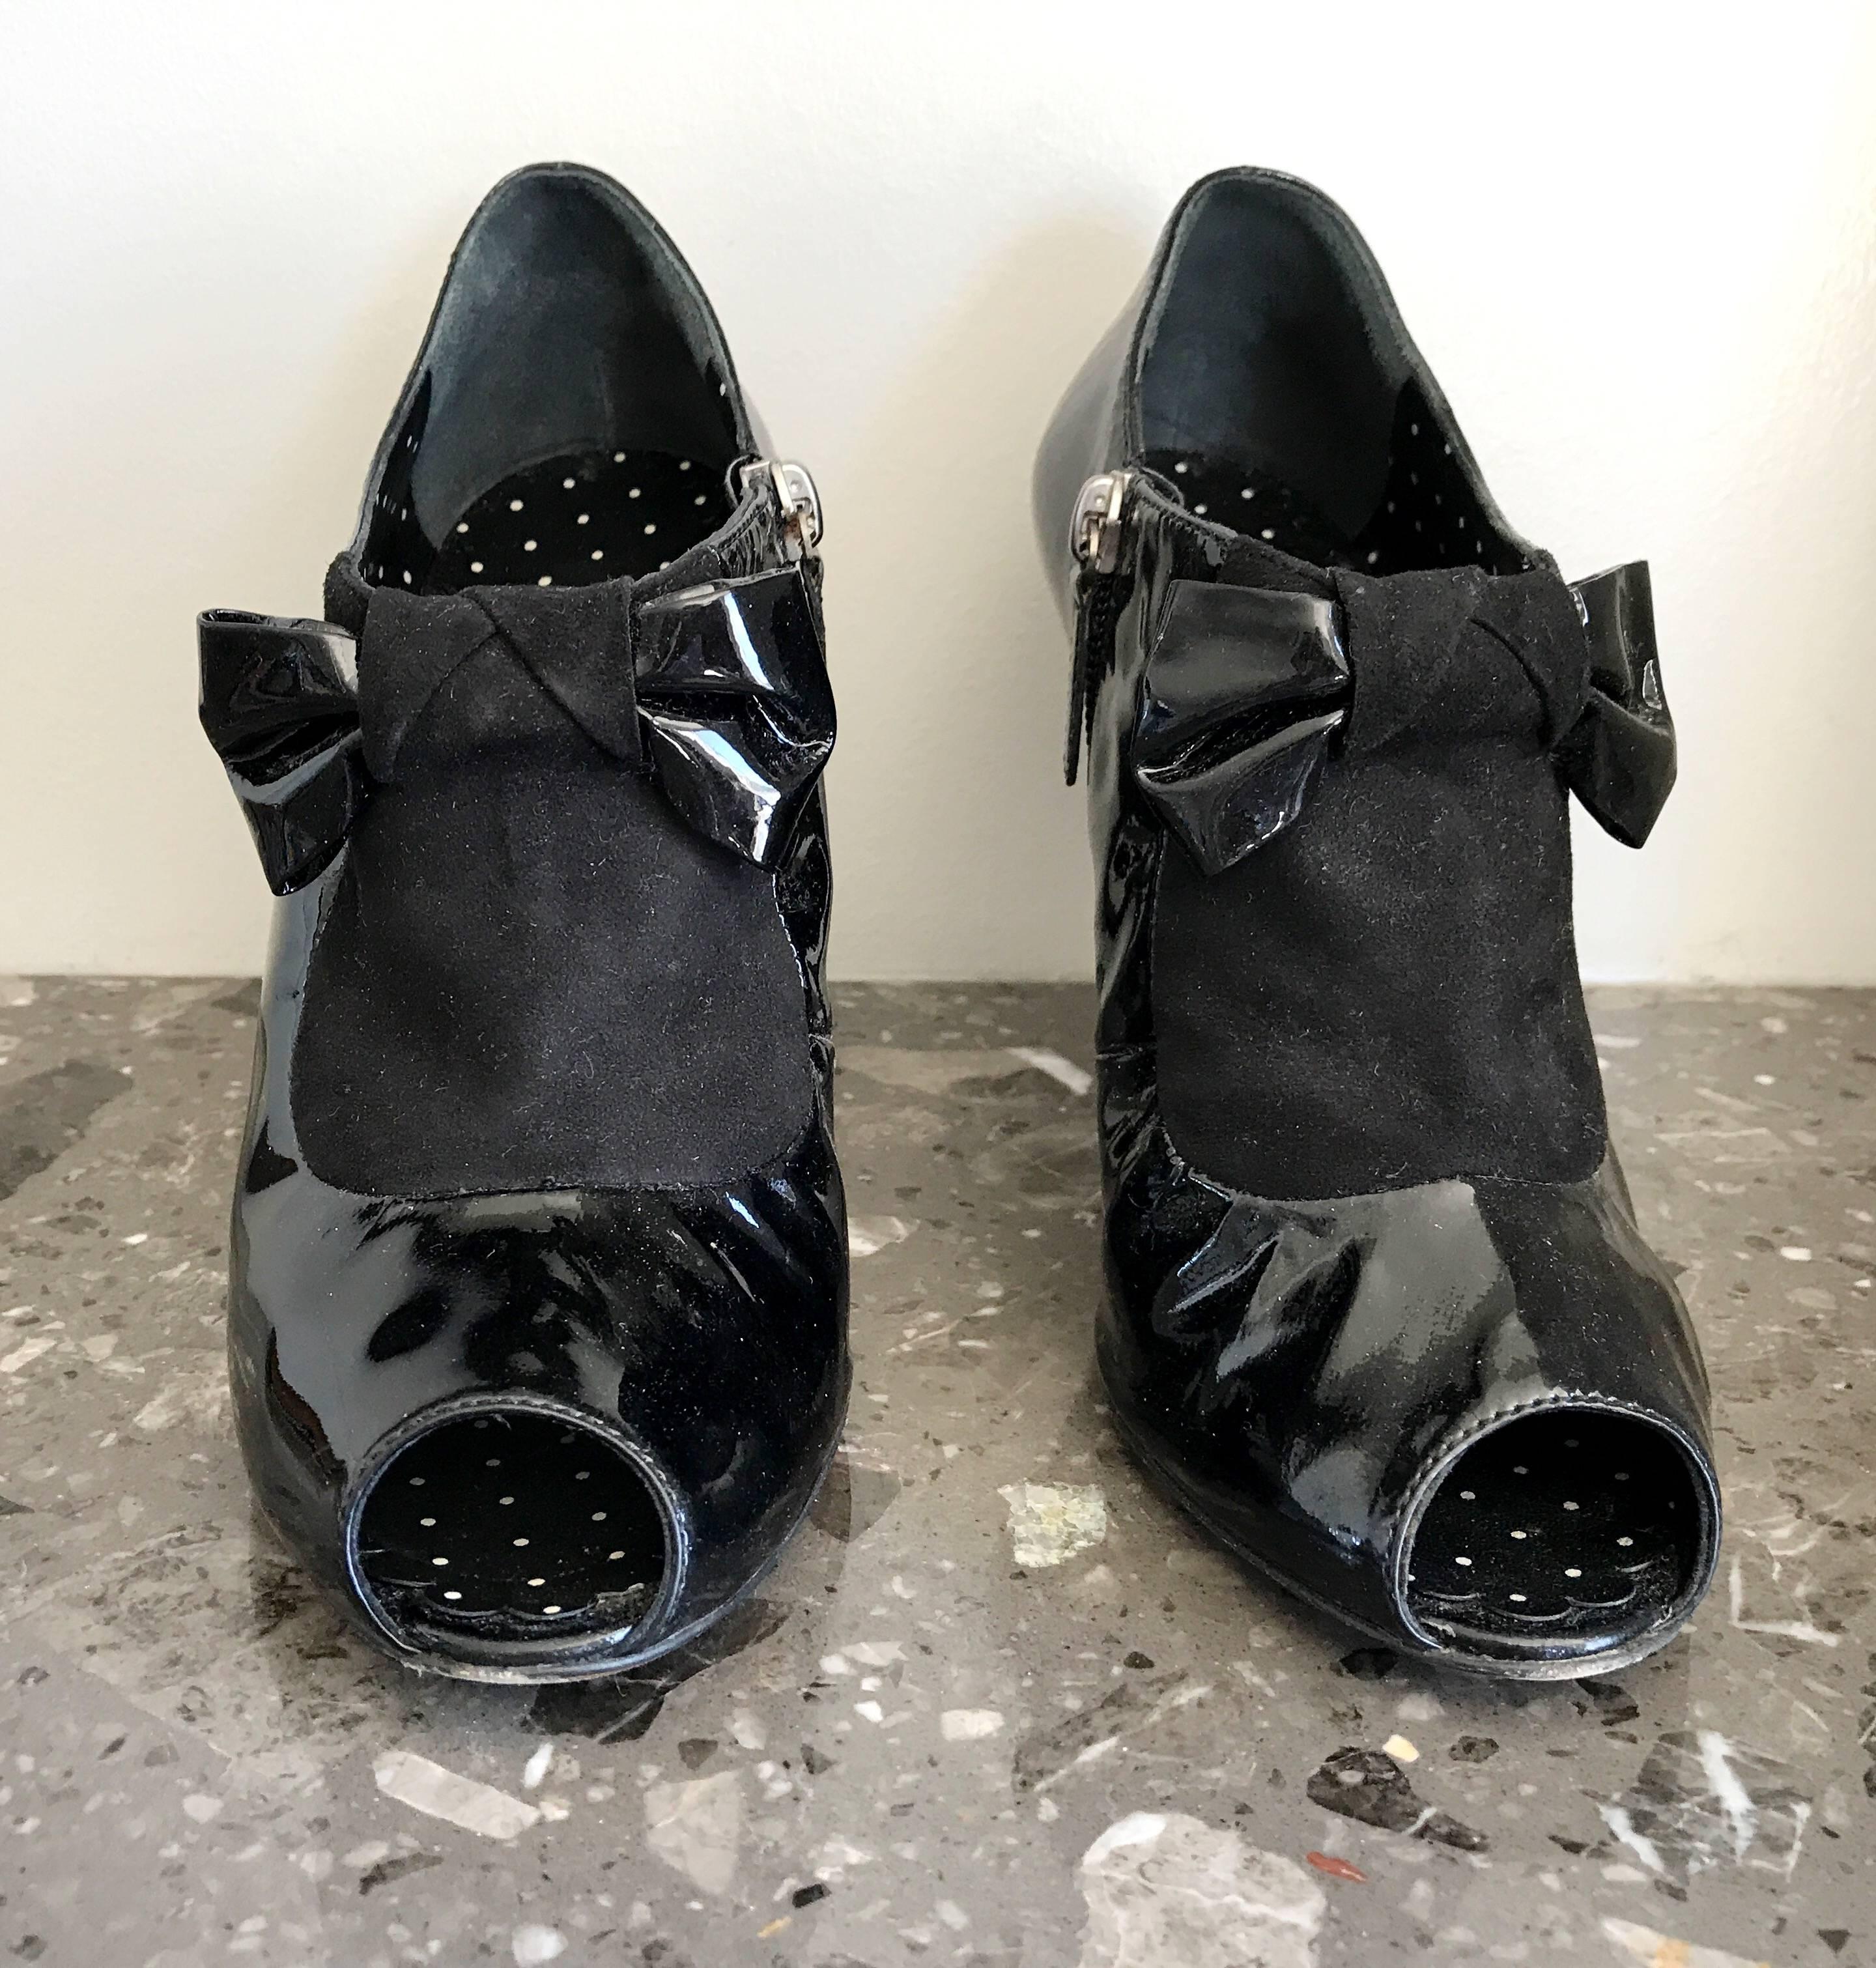 Awesome 90s black patent leather MOSCHINO 'Cheap & Chic' peeptoe tuxedo ankle boots! Features black suede above the toe, with a chic patent leather bow. Zipper up the inner ankle. Black and white mini polka dot lining. Can easily be dressed up or